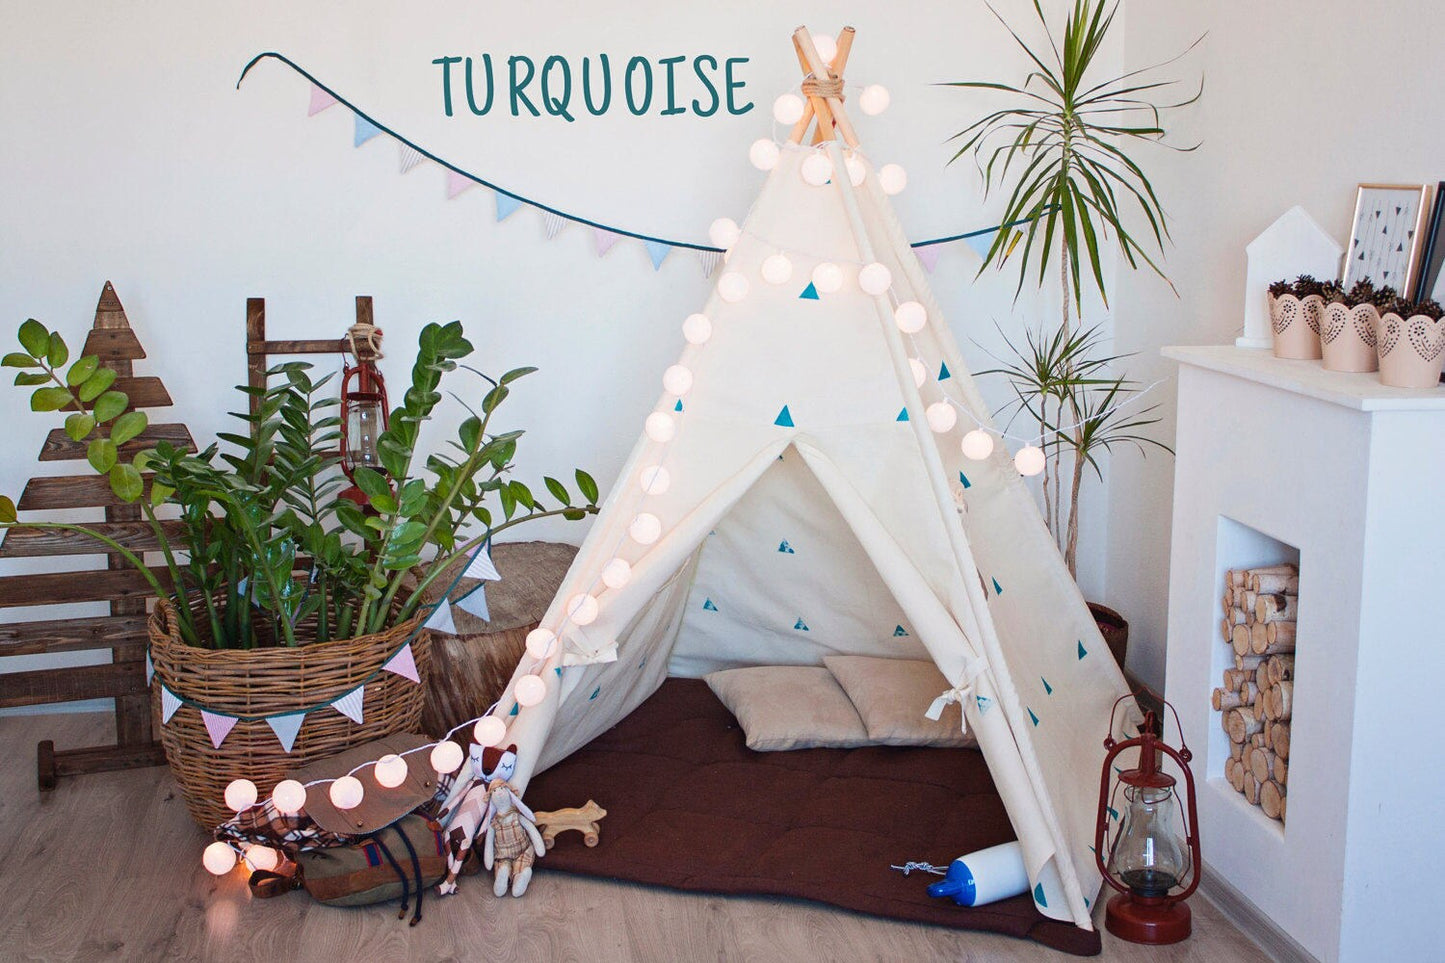 TURQUOISE triangles Play Tent, Teepee, Tent, Tipi, Play tent, Play house,Tent for kids, Kids Teepee, Cotton Teepee tent - Christmas gift